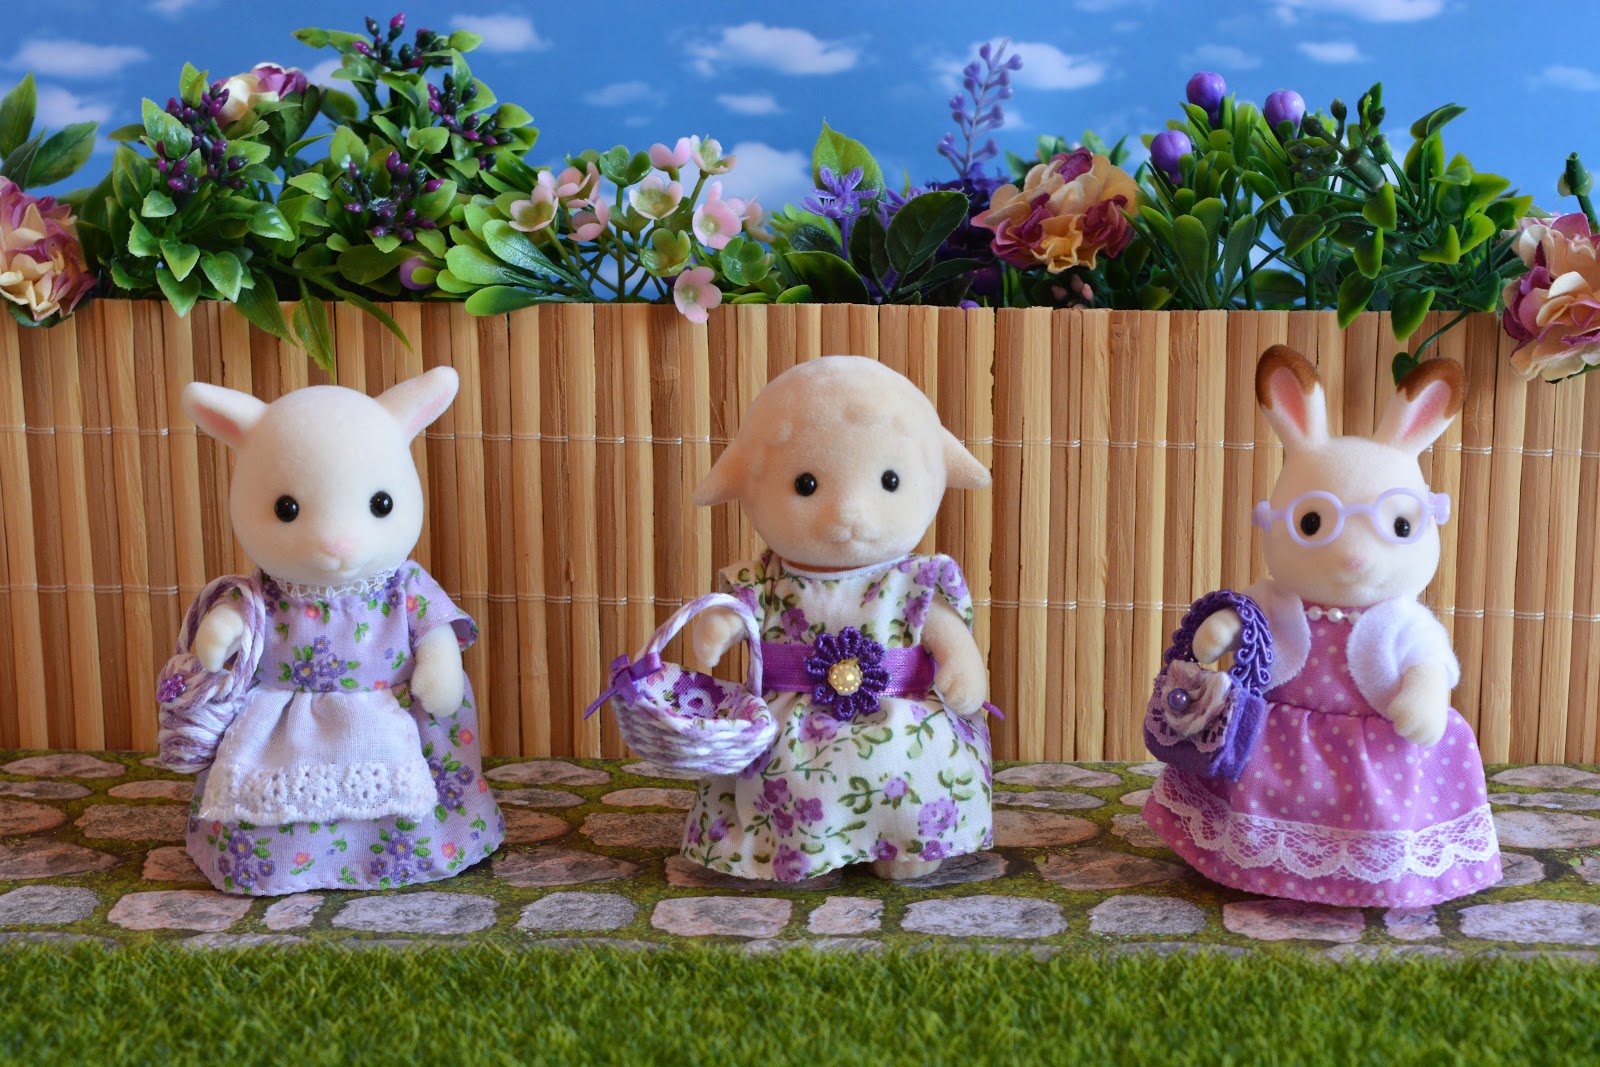 3 Calico Critter moms with a DIY purses and baskets.